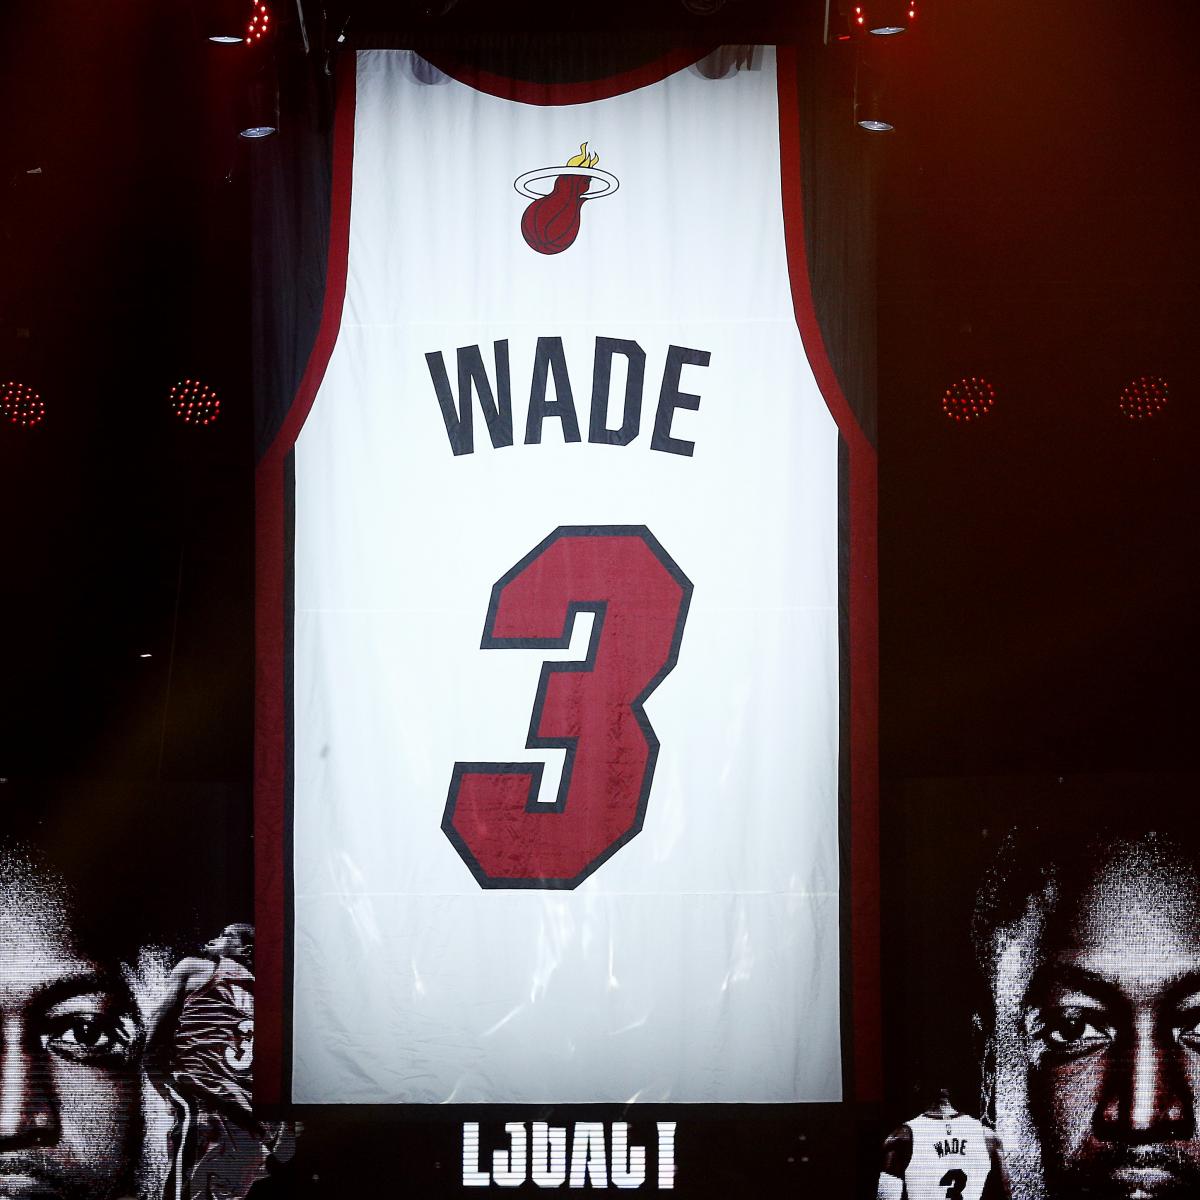 Dwyane Wade expresses his gratitude at jersey retirement cremony